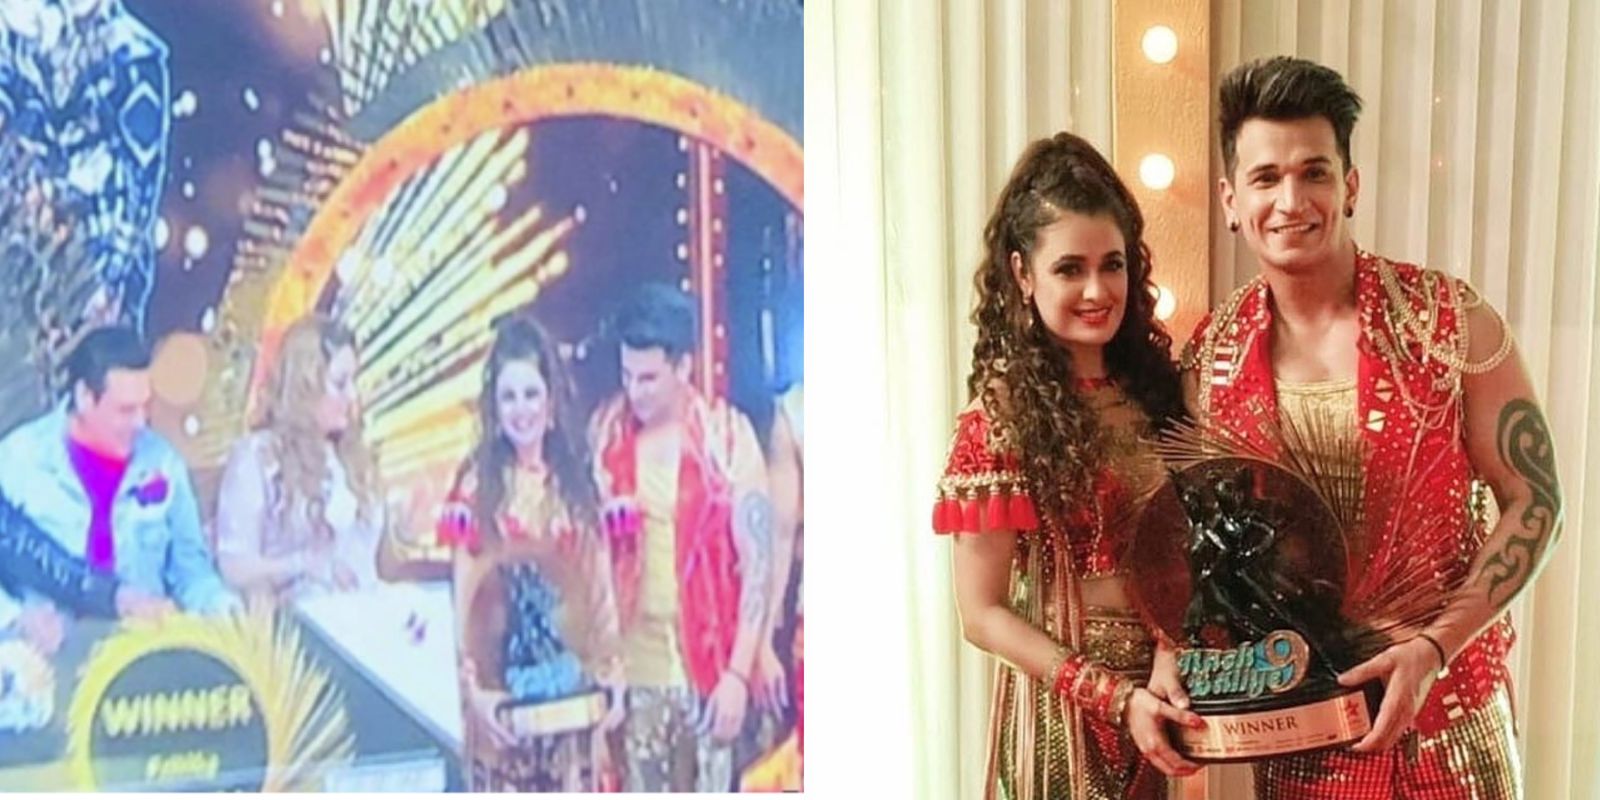 Nach Baliye 9: Prince Narula And Yuvika Chaudhary’s Winning Moment Leaked! See Pictures And Videos...